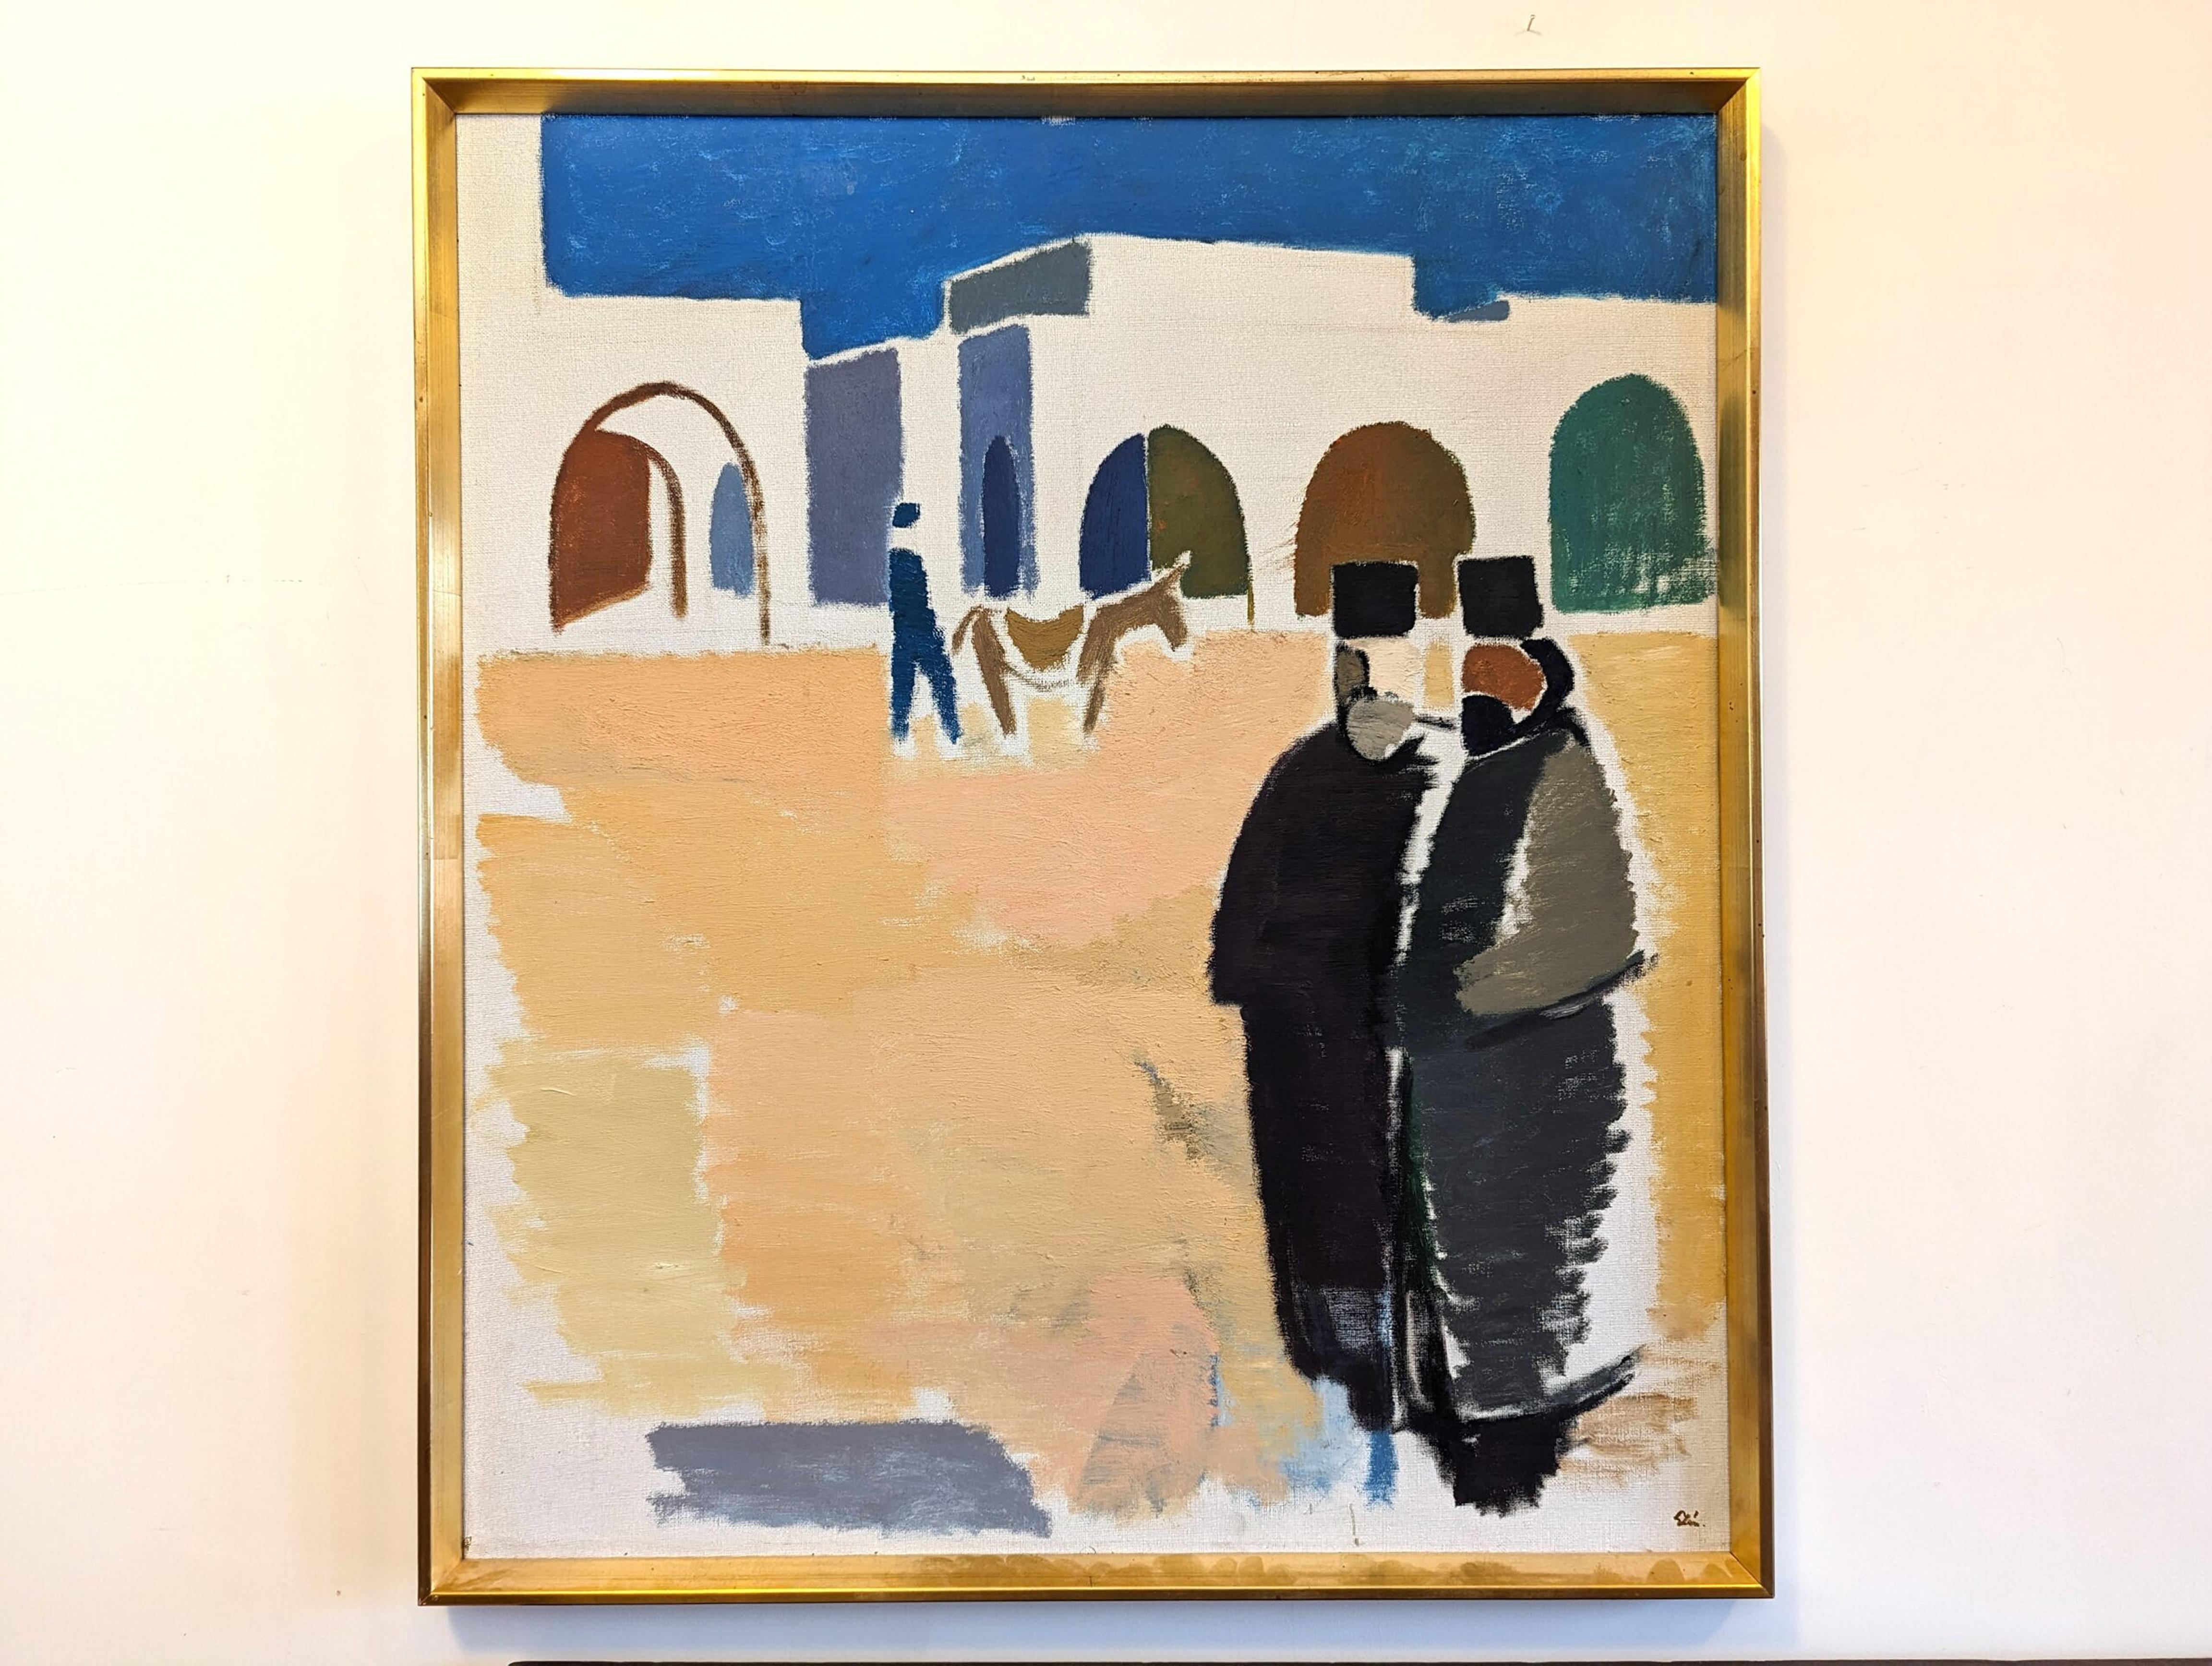 PRIESTS IN GREECE
Oil on Canvas
Size:  85 x 75 cm (including frame)

A large and striking mid-century modernist painting, executed in oil onto canvas.

The composition presents a charming street scene at Patmos in Greece. In the foreground, two